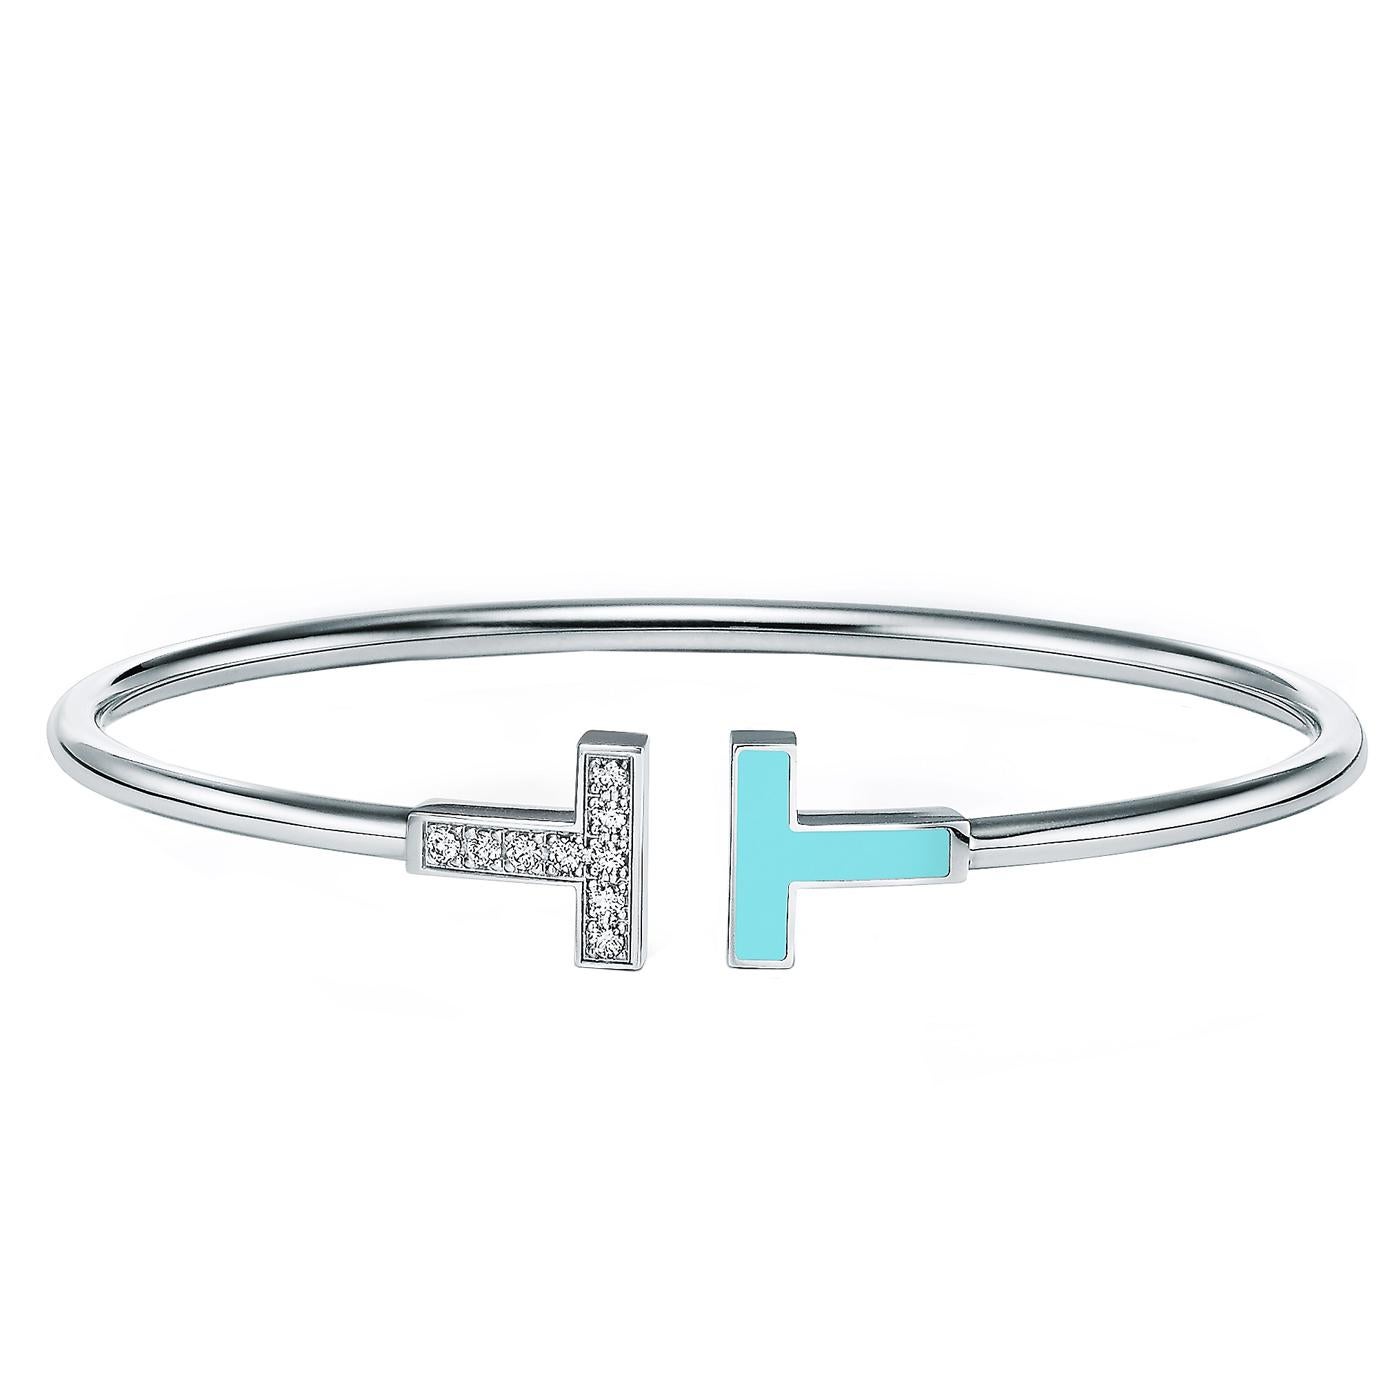 This modern bracelet is enhanced with diamonds and turquoise, a favorite stone of Tiffany designers for over a century. The natural formation of the stone creates subtle differences in appearance, ensuring each piece is as unique as its wearer. As